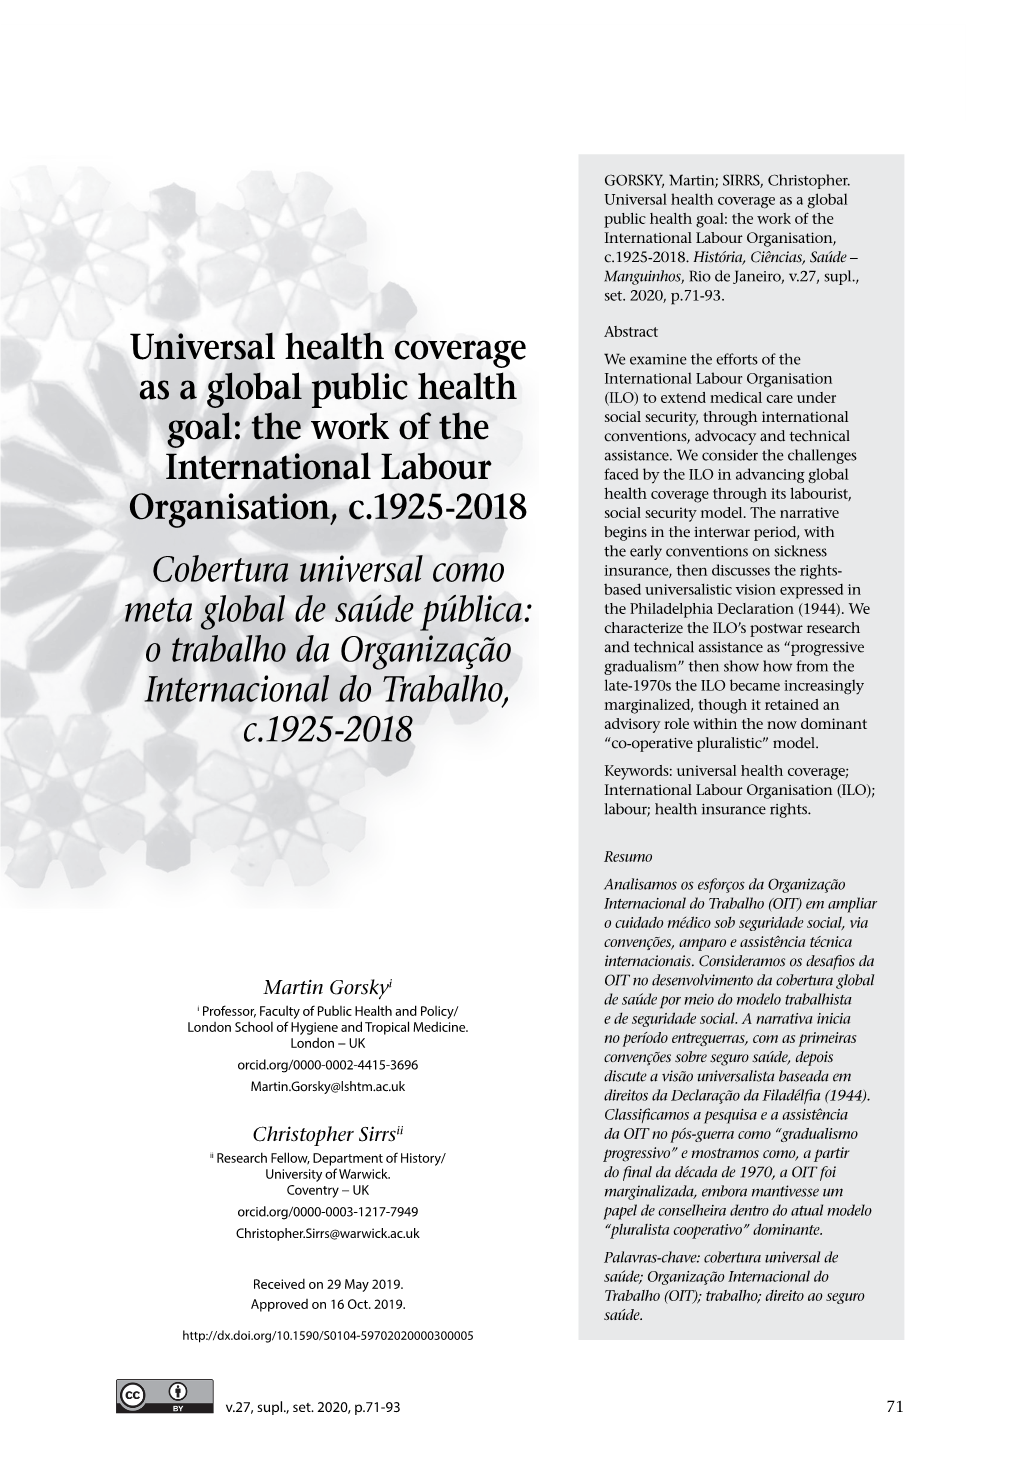 Universal Health Coverage As a Global Public Health Goal: the Work of the International Labour Organisation, C.1925-2018